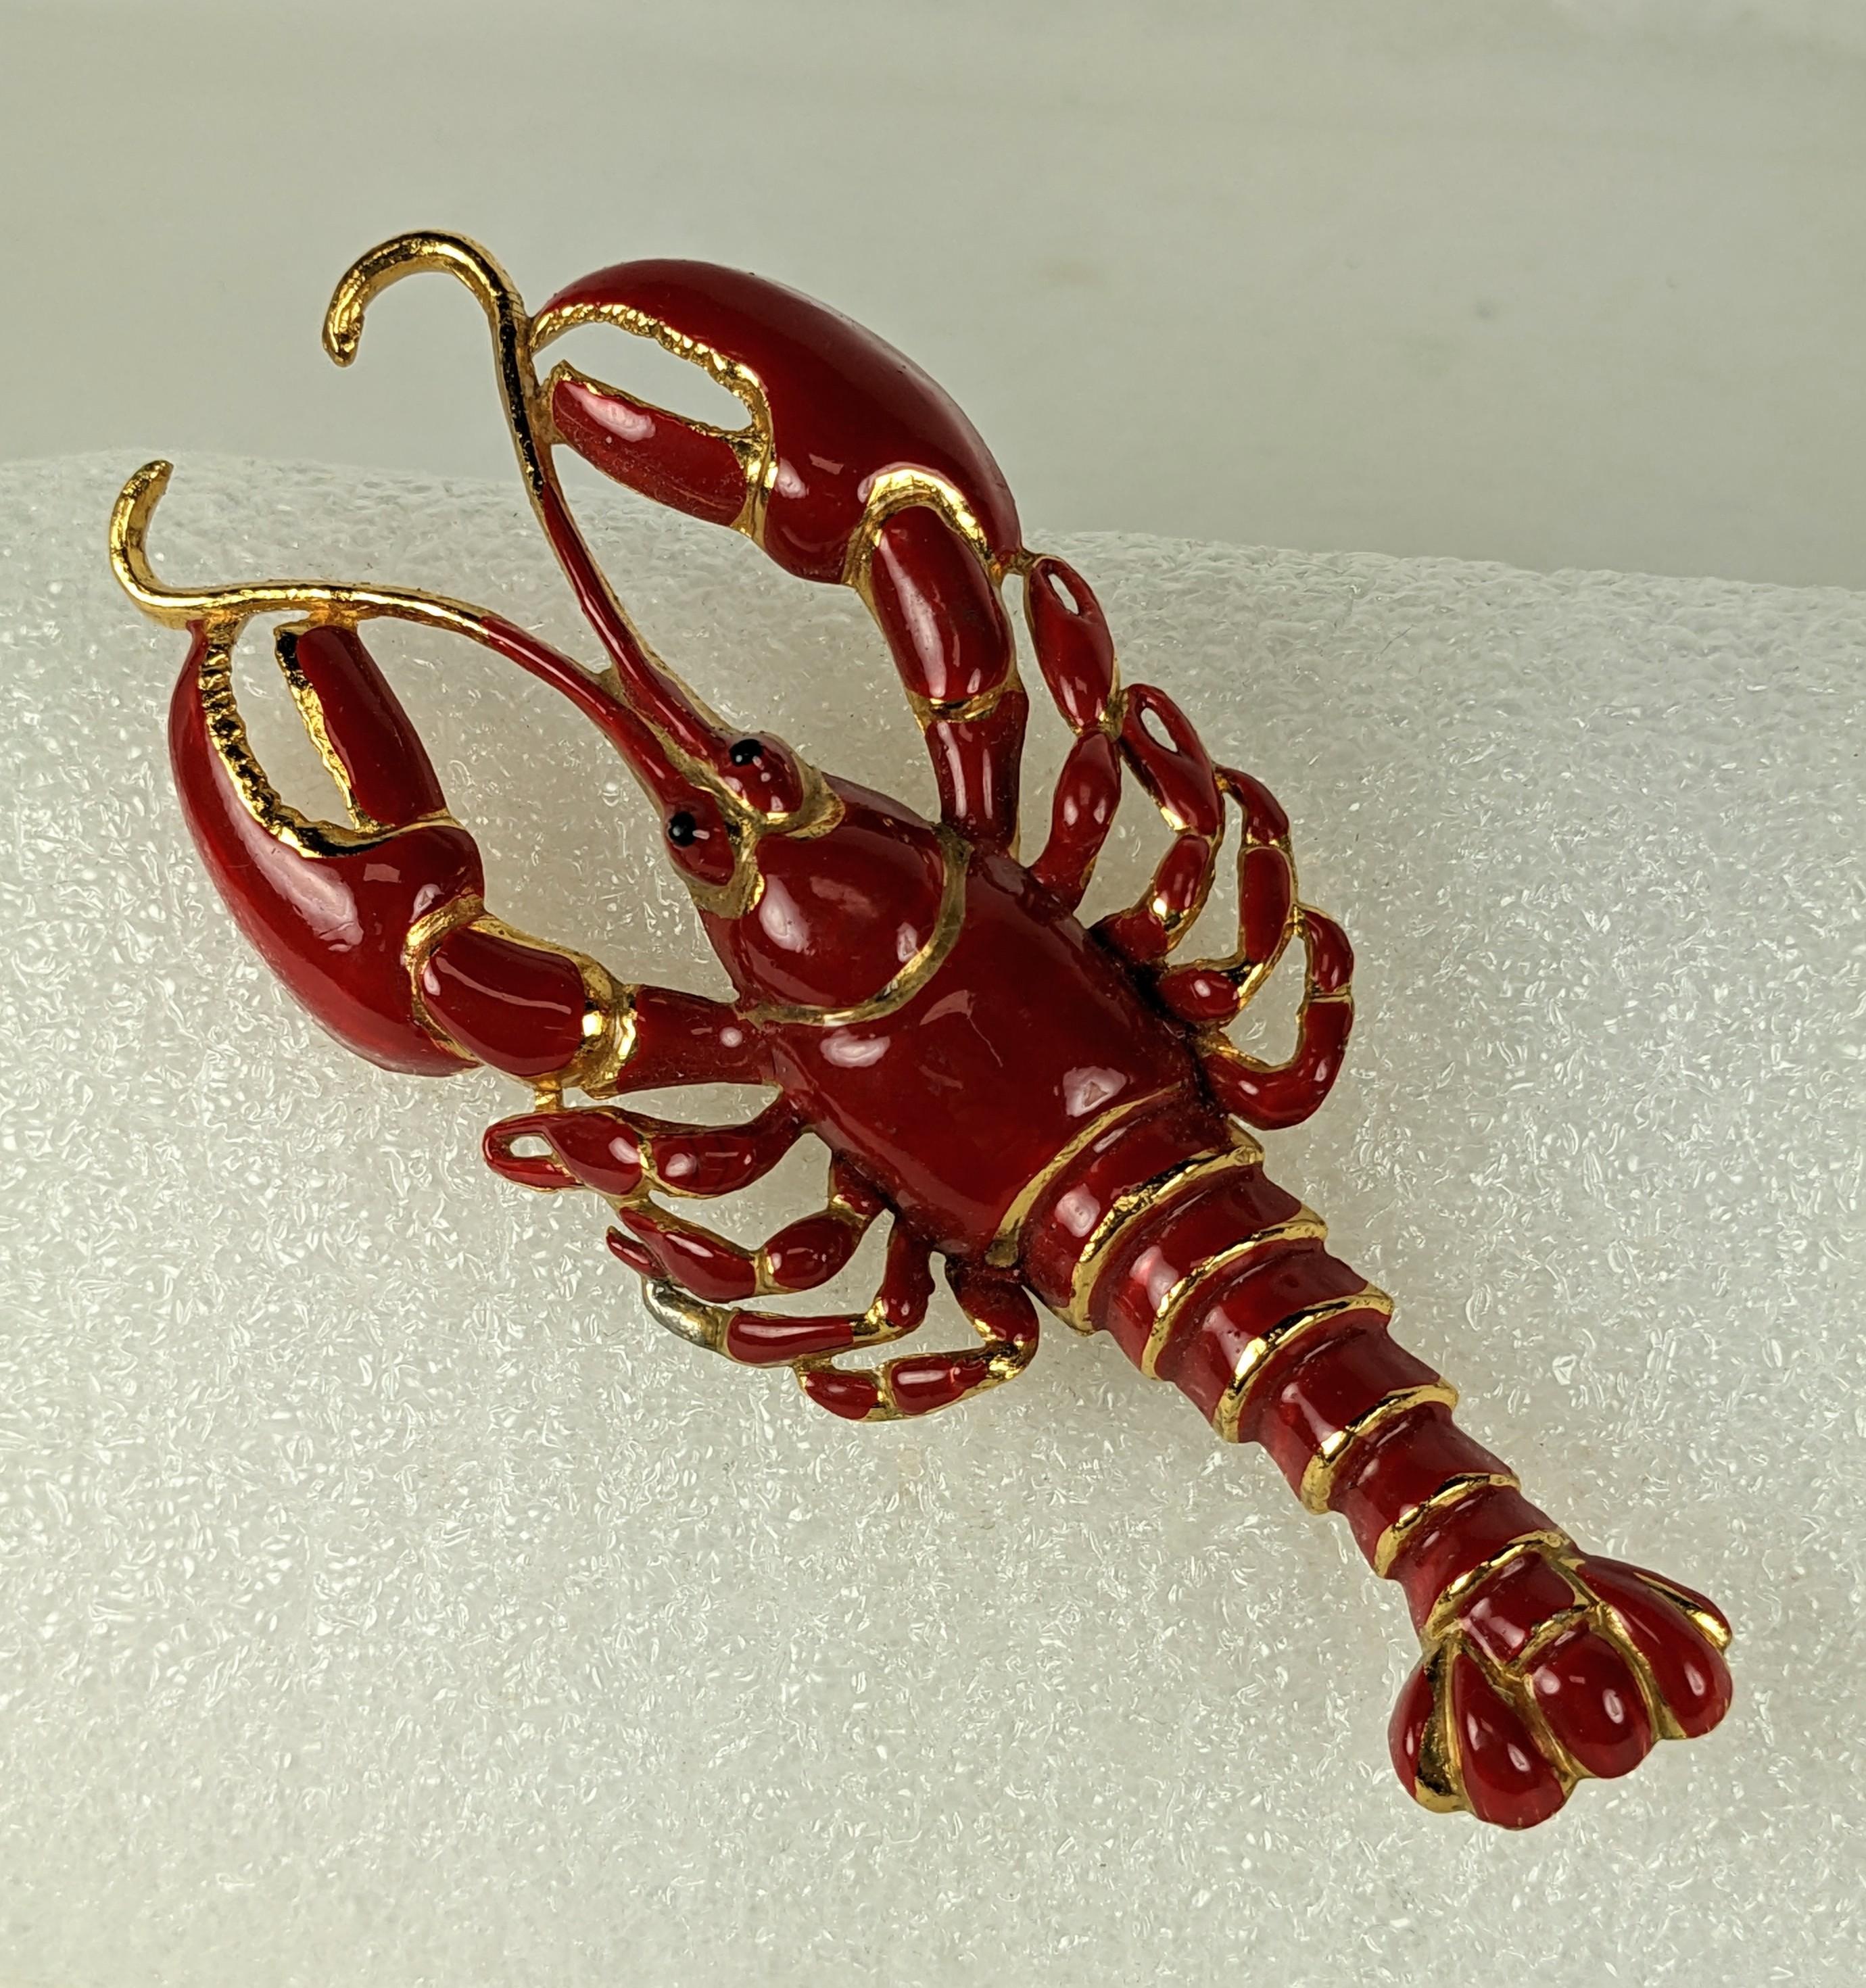 Art Deco Enamel Lobster Brooch in the Surrealist style. Large scale in gilt metal with vibrant red enamel. Channel your inner Schiaparelli with this brooch perched in unusual places. Likely made by Coro. 1930's USA. 4